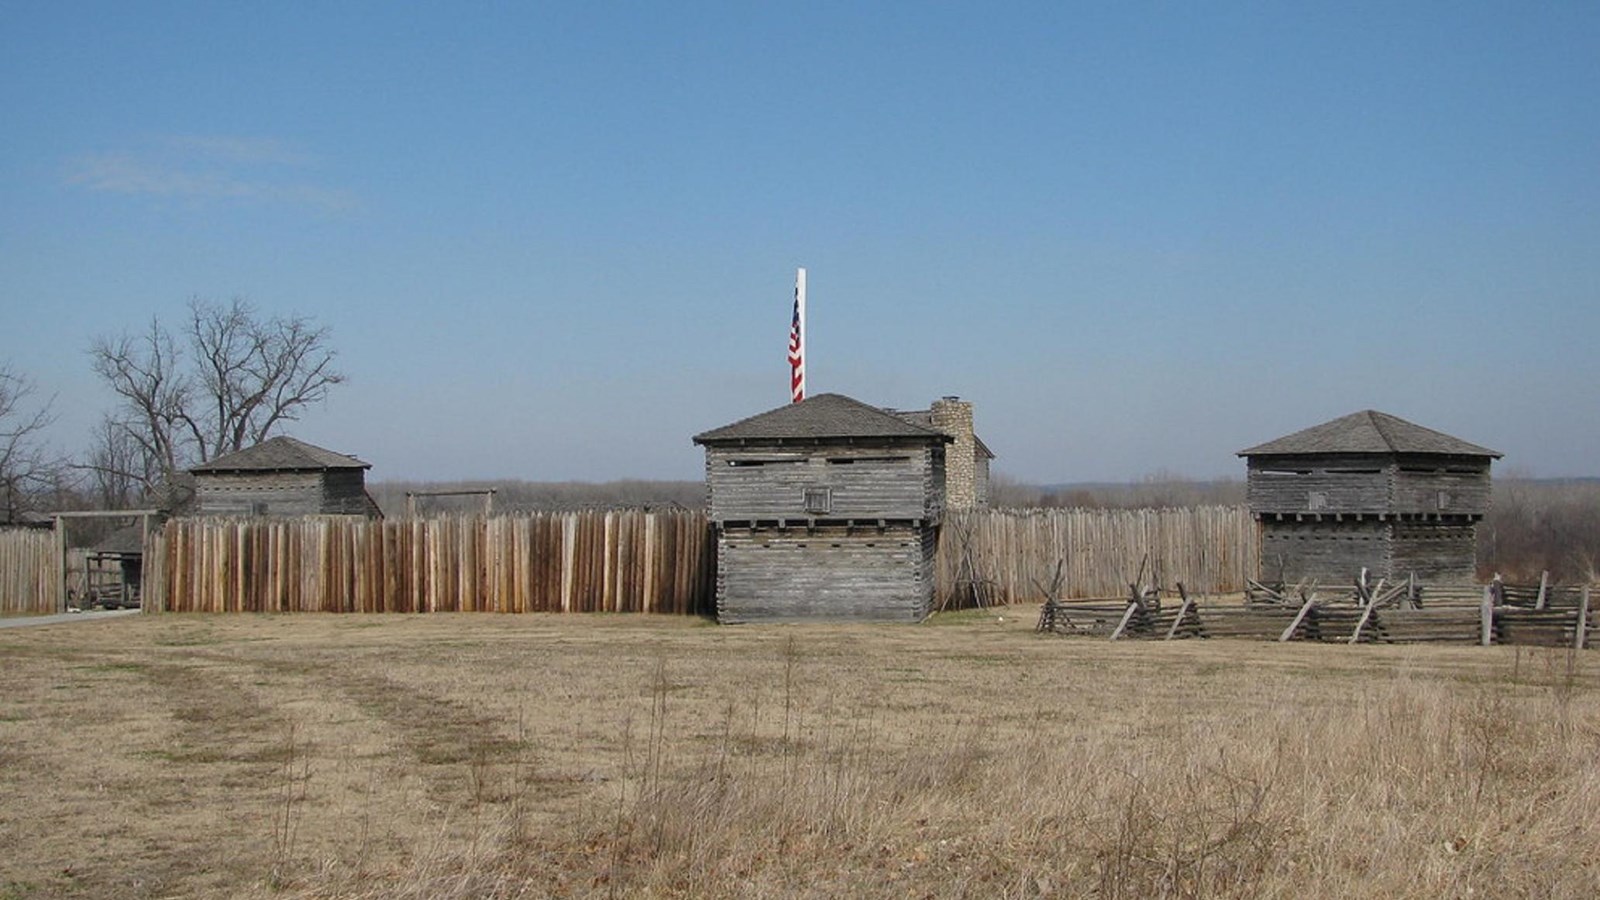 A natural wood palisade with square sentry towers surrounds a few old building